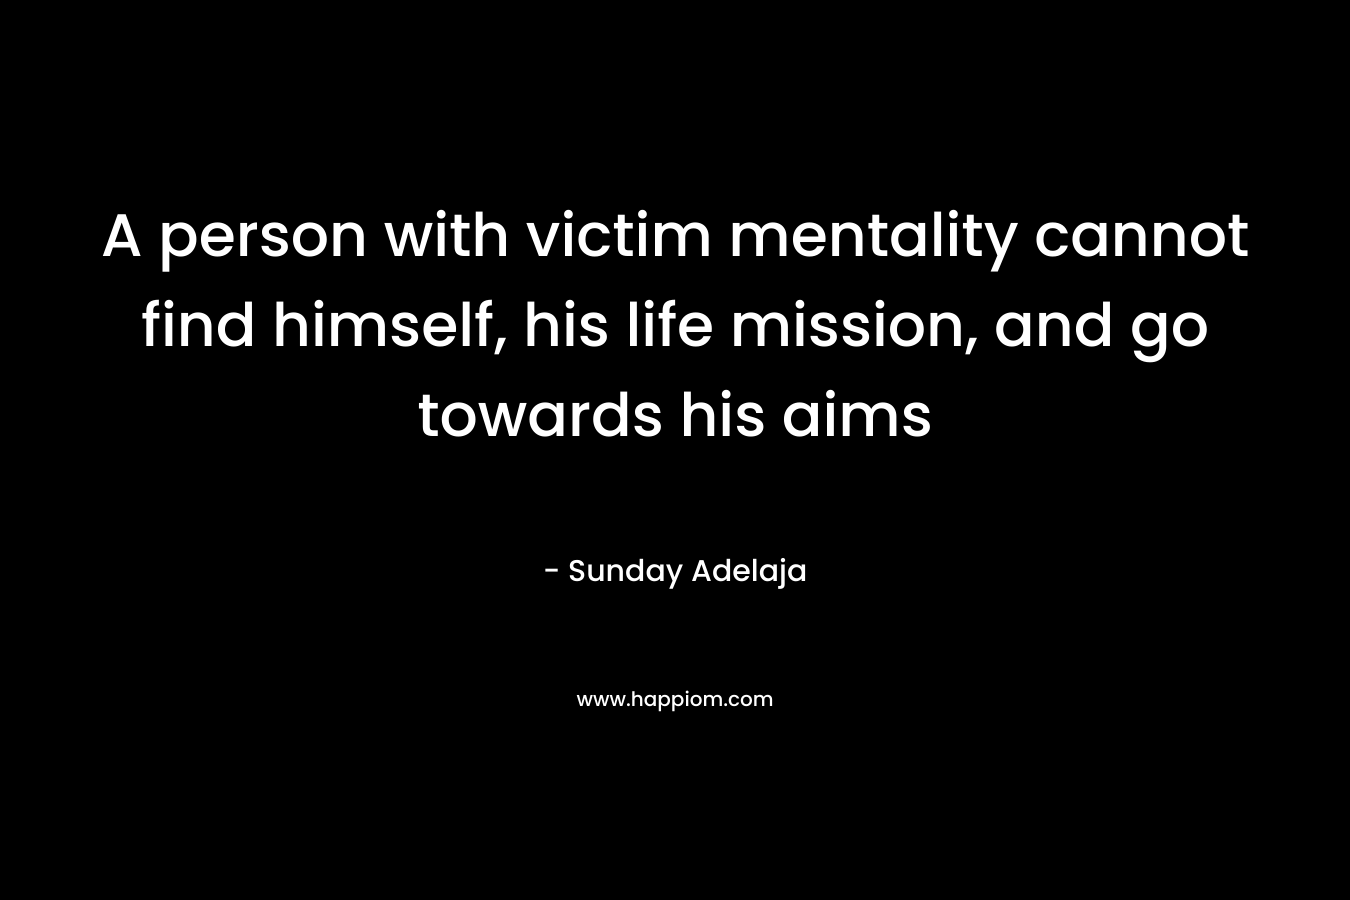 A person with victim mentality cannot find himself, his life mission, and go towards his aims